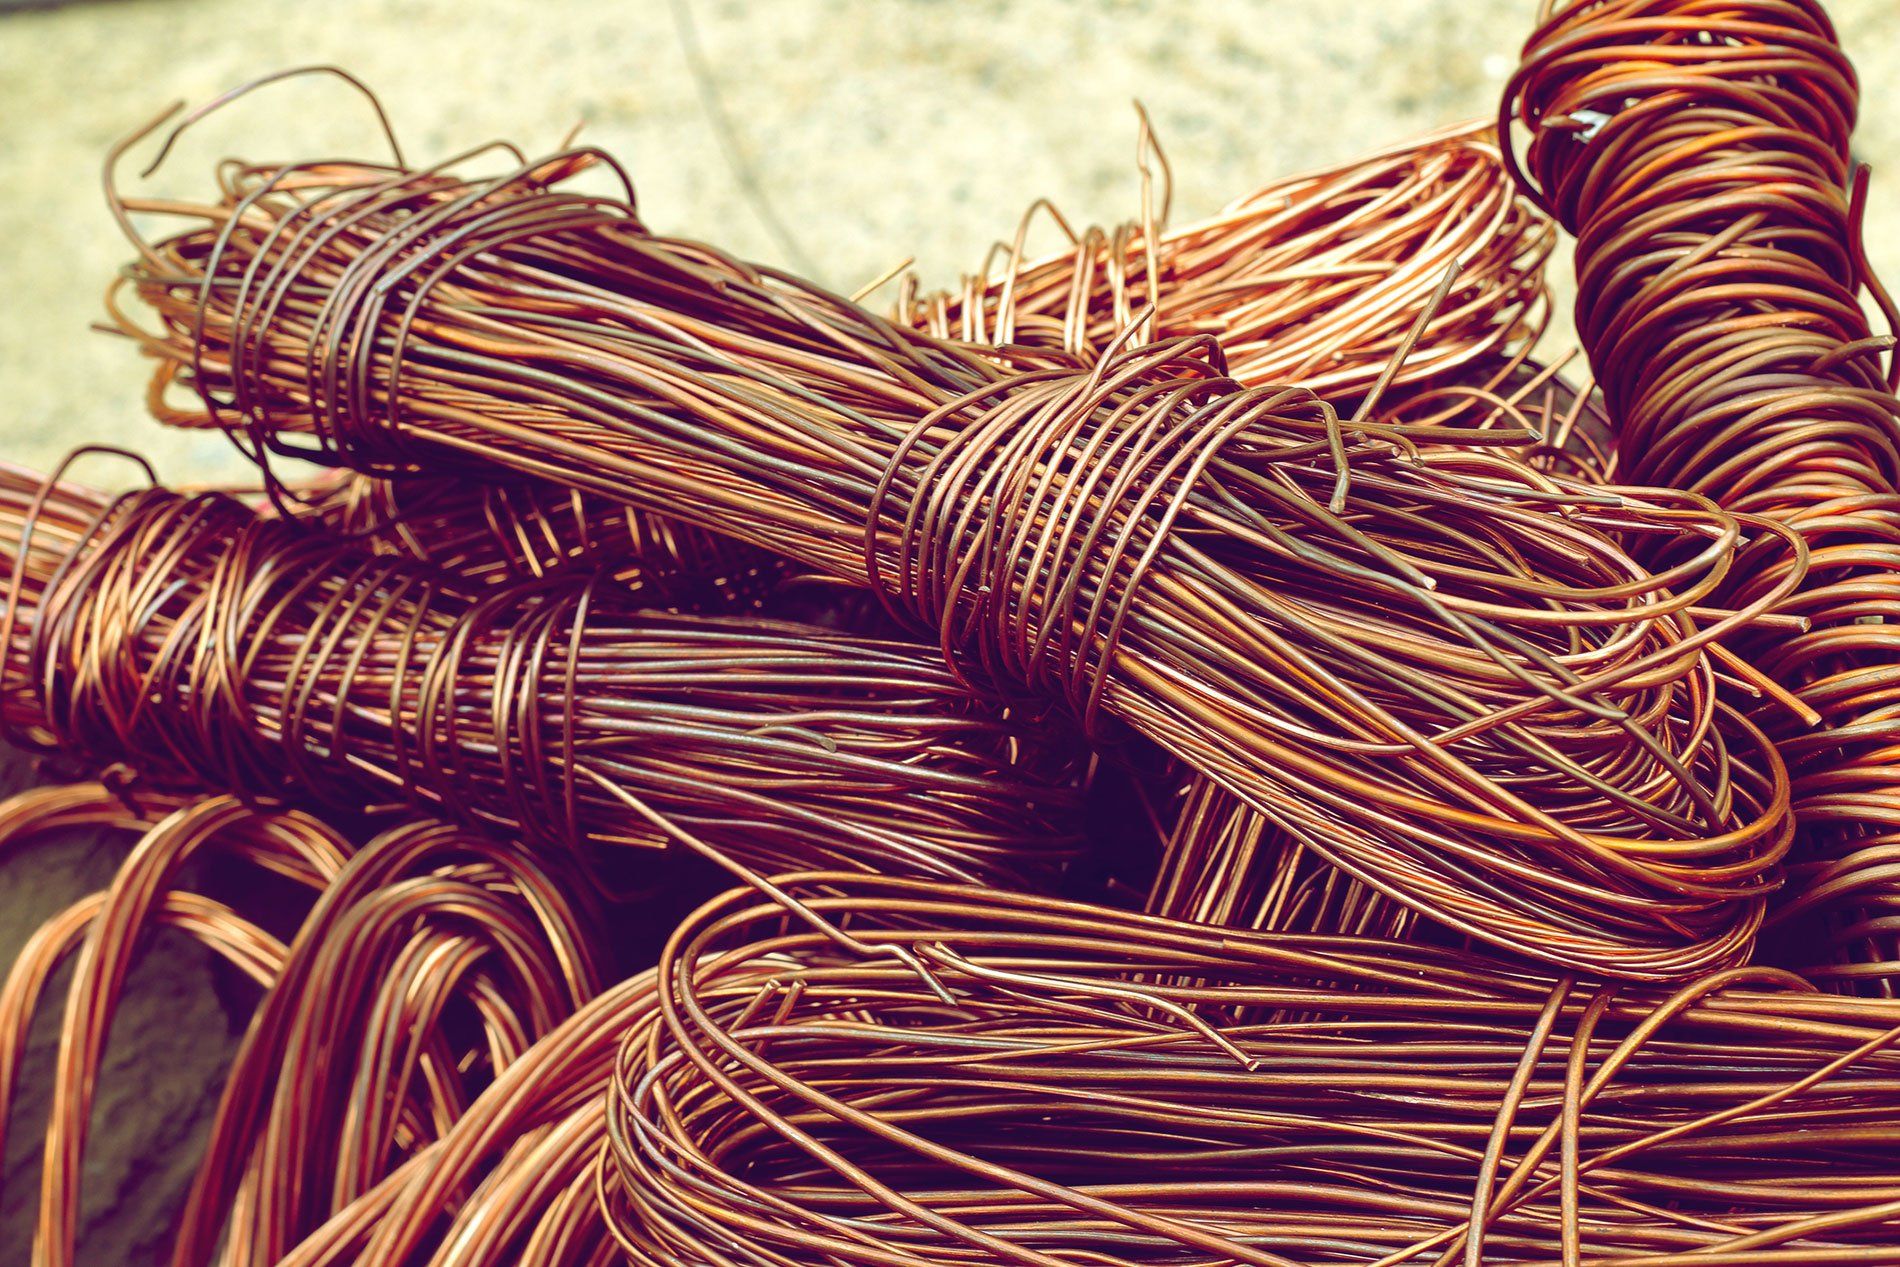 Copper wire from factory used for recycling.